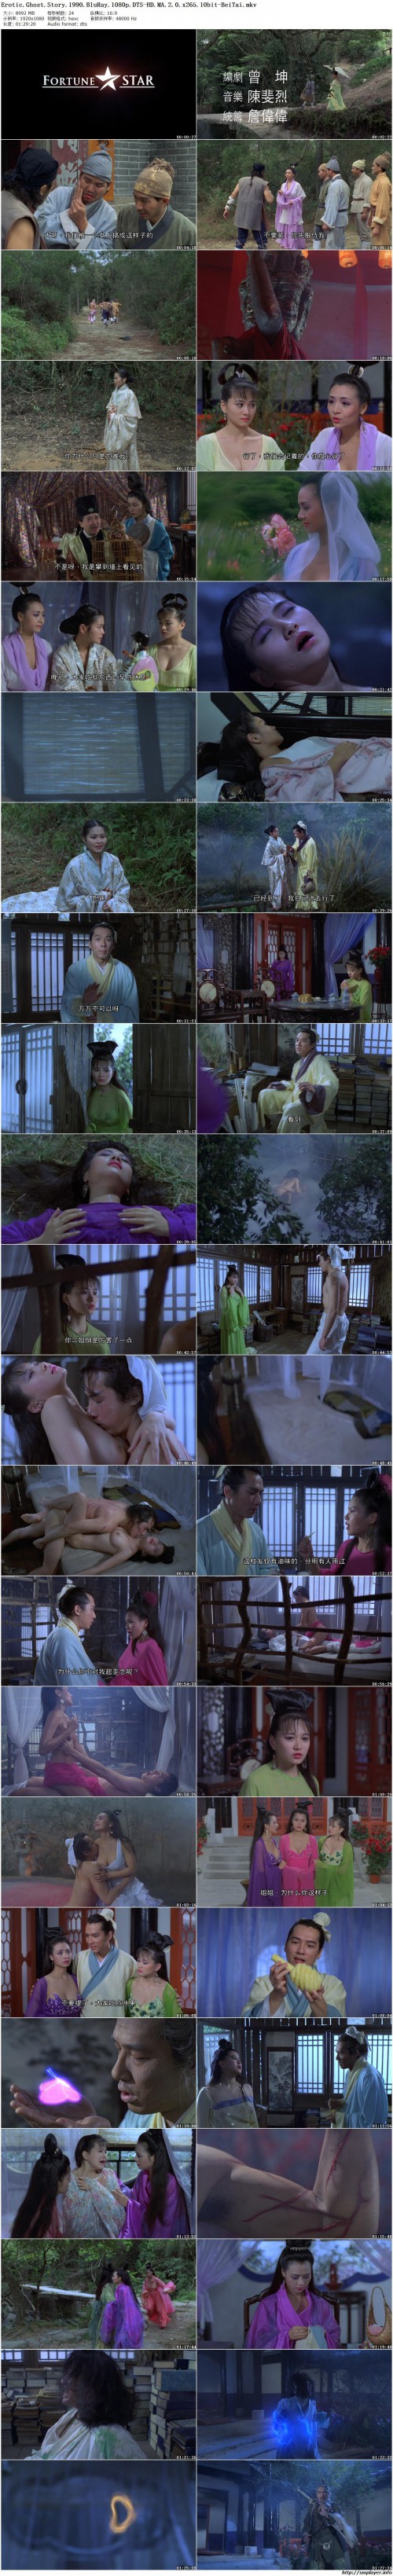 Erotic.Ghost.Story.1990.BluRay.1080p.DTS HD.MA.2.0.x265.10bit BeiTai preview